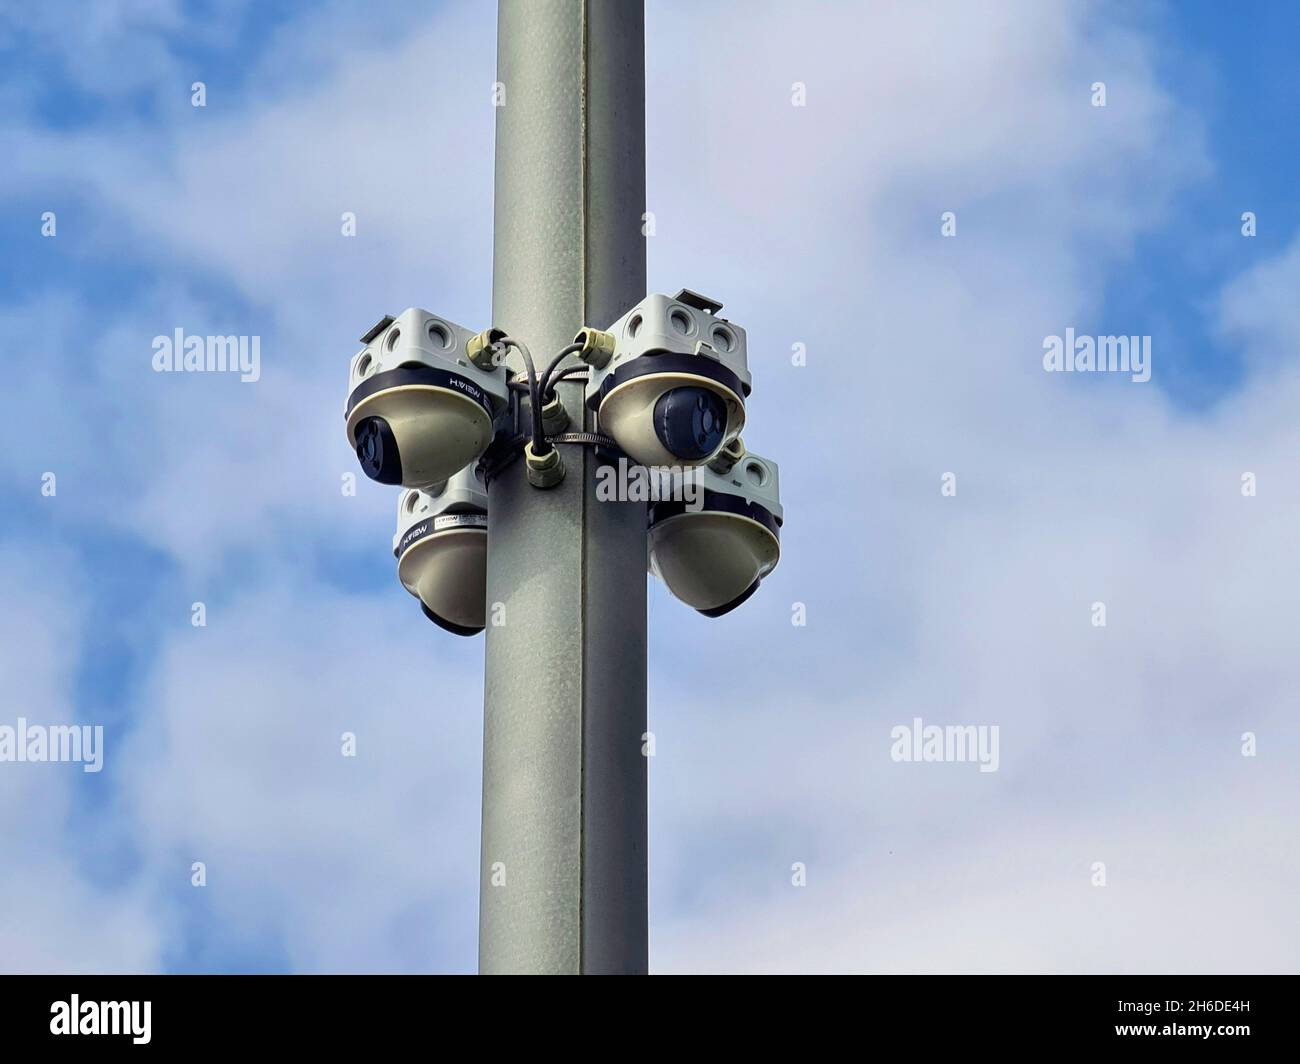 pole with security cameras, Netherlands Stock Photo